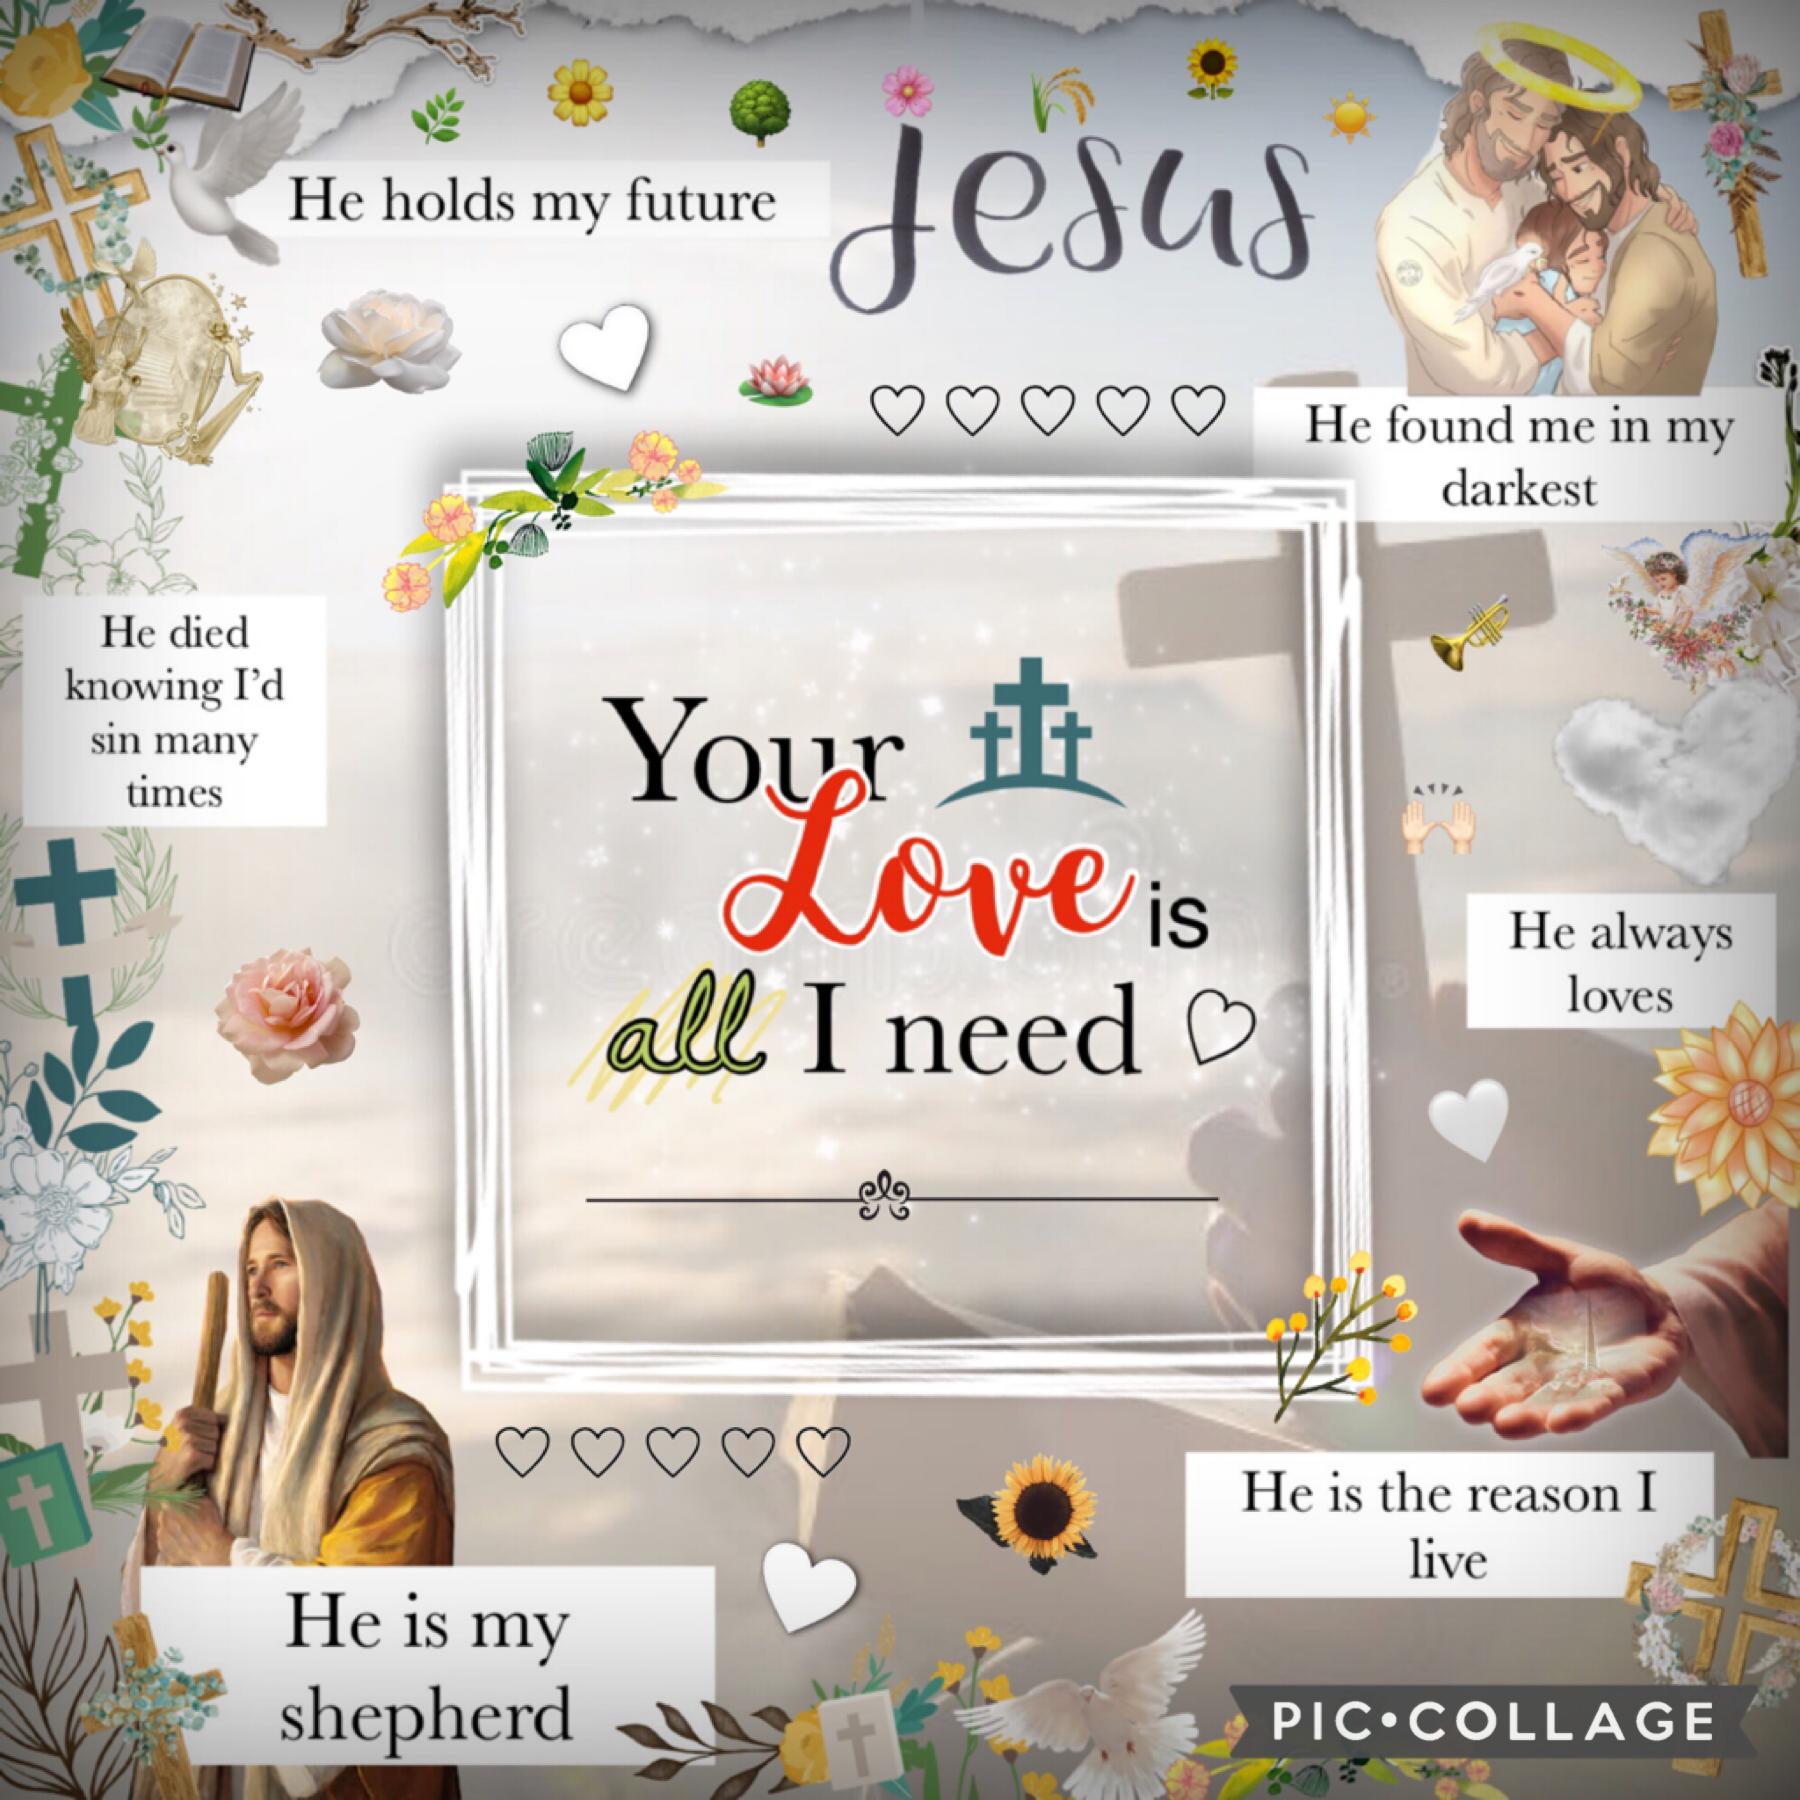 🕊️ 2/8/23 (tap here//added overlay, repeated caption) 🕊️
i felt like collaging about Jesus. He’s pulled me out of my depression and bad habits, and now, every morning i look forward to the day. He loves you so much, He long to be near you. pray to Him tod